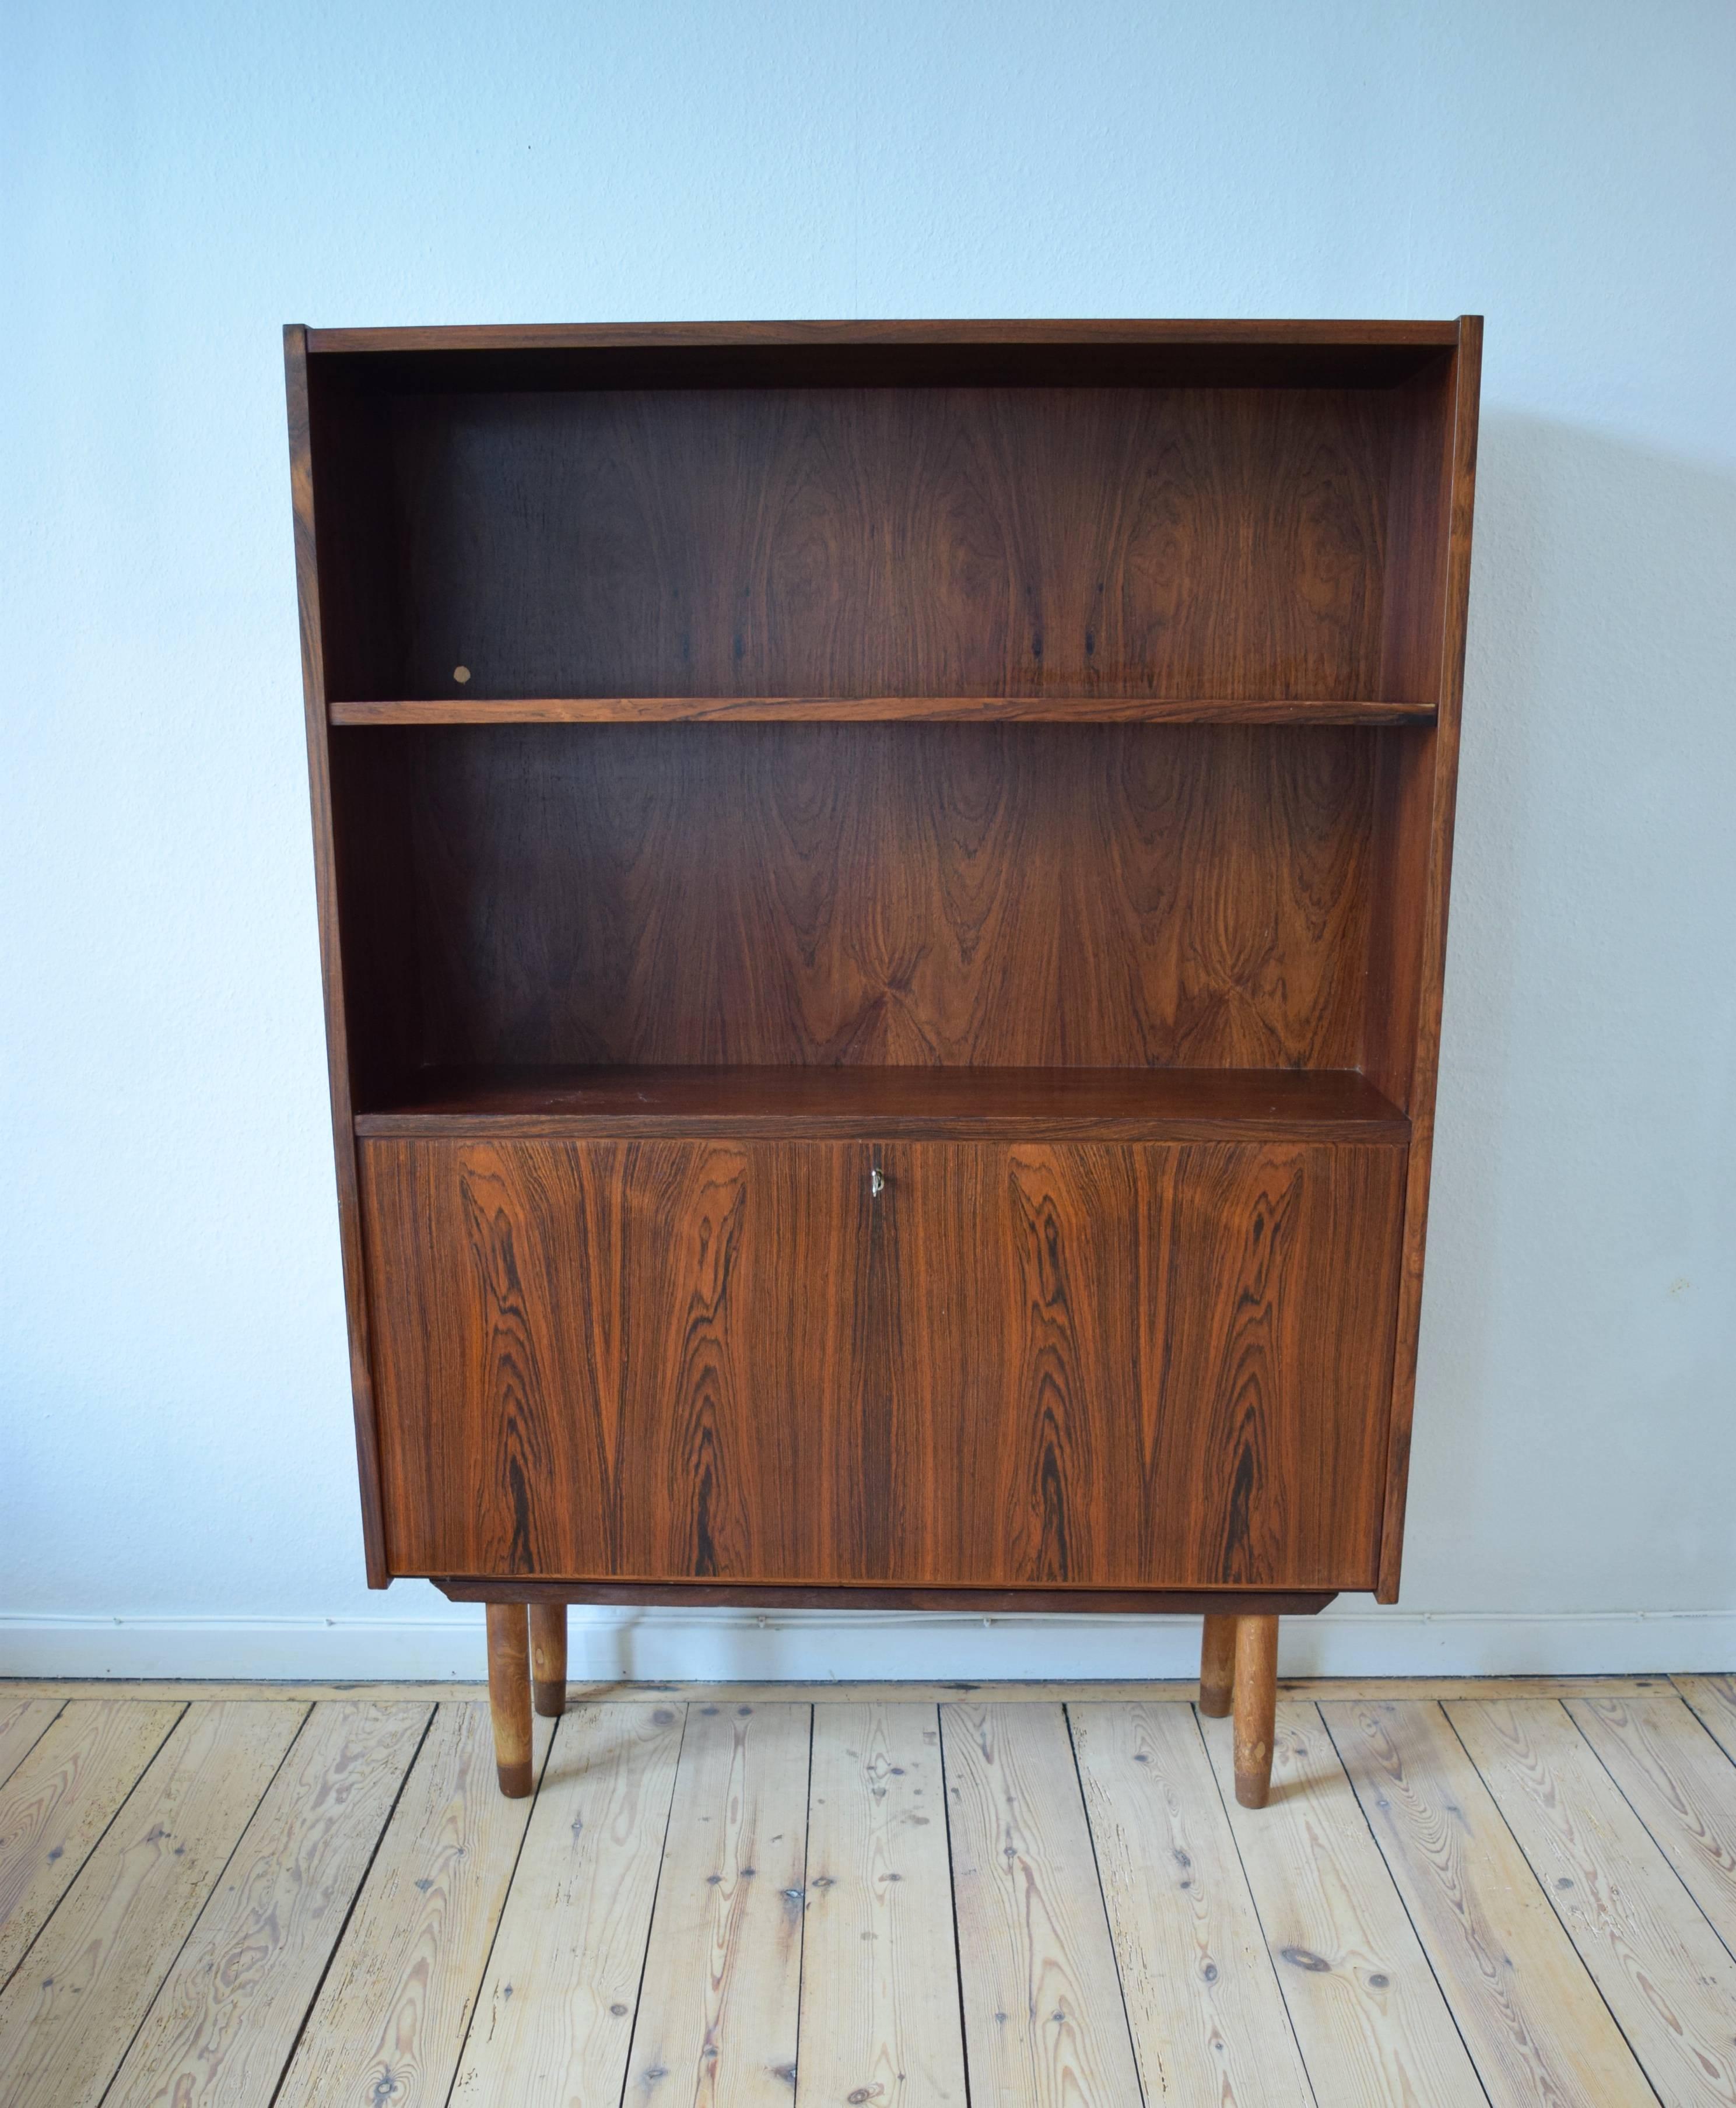 Rosewood drinks cabinet/bookshelf manufactured in Denmark in the 1960's by Viby Møbelfabrik. Features one adjustable shelf, and a drinks cabinet with pull down door, and sits on a frame base with oak & teak legs. Some ducting holes in the back